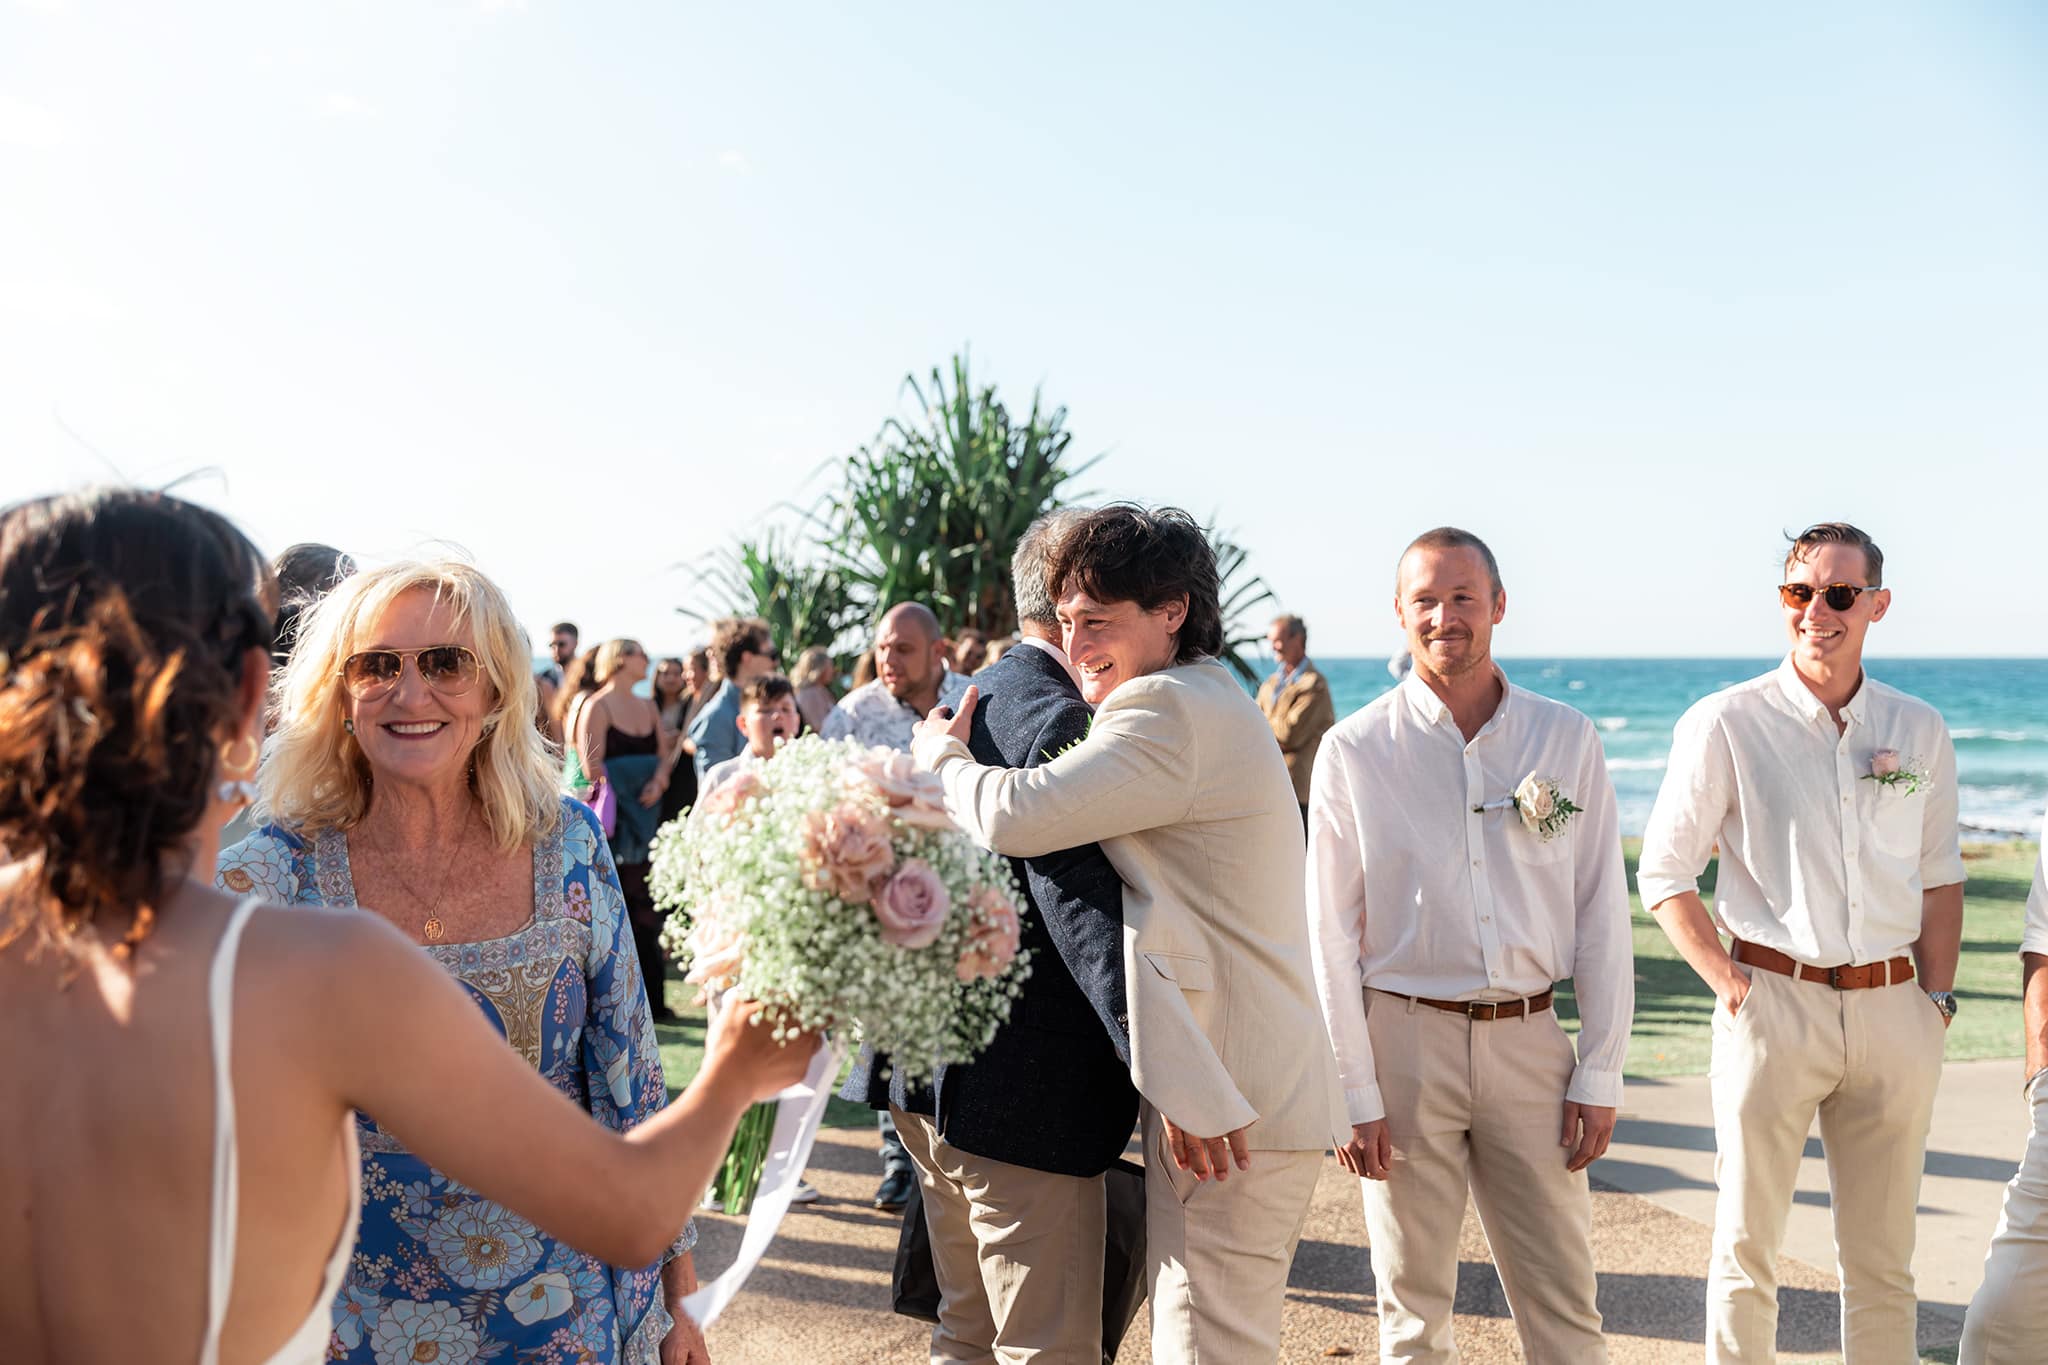 Wedding ceremony at Burleigh Heads on the Gold Coast, by Mooi photography.